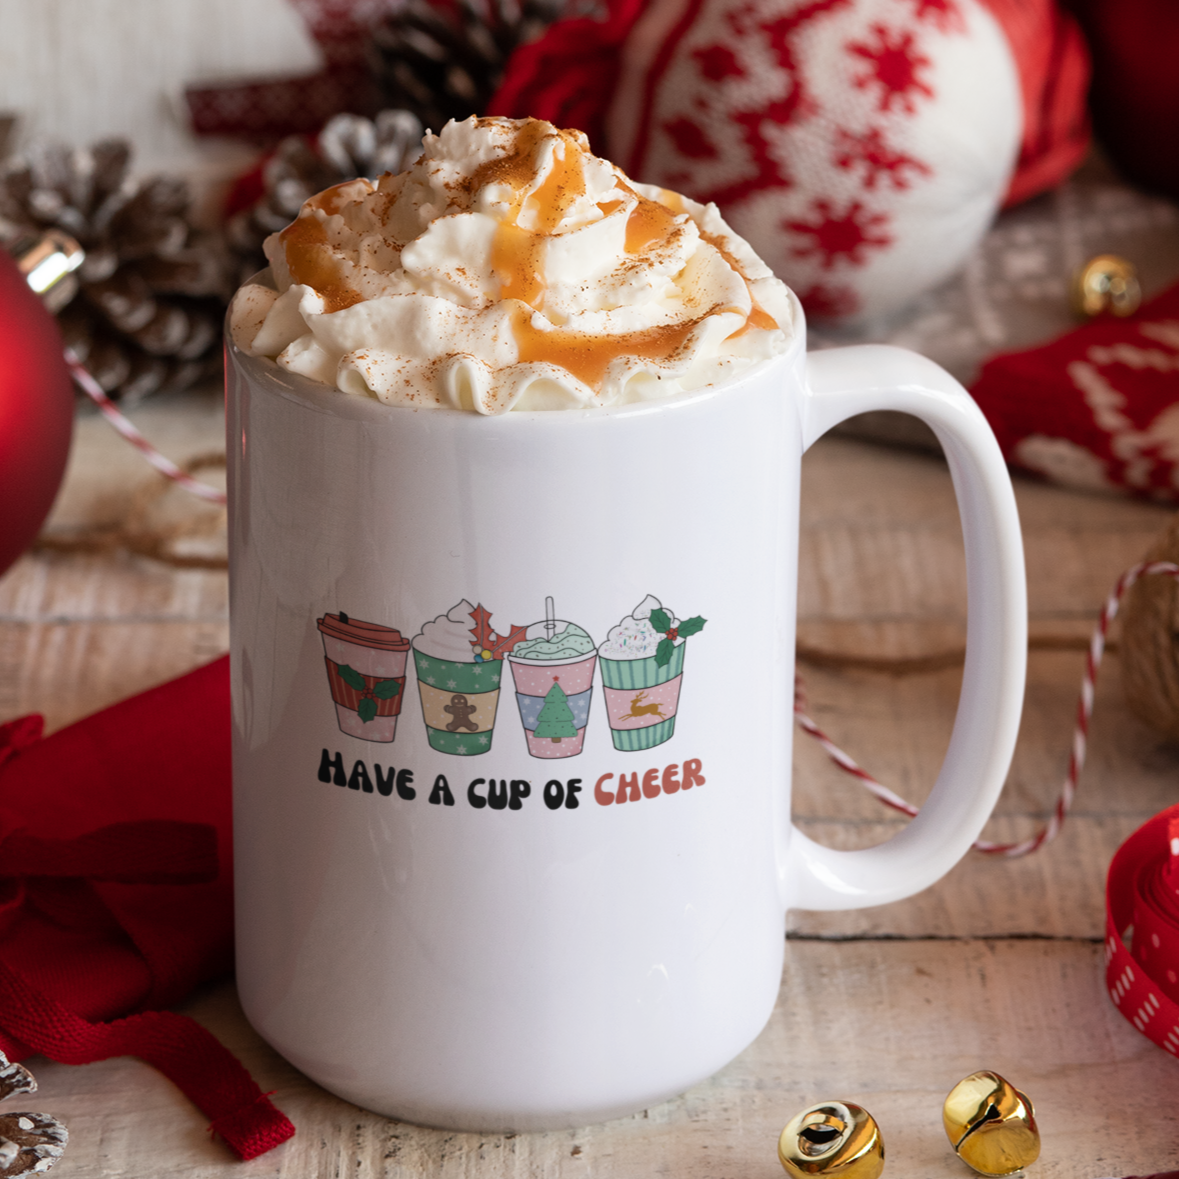 Have A Cup Of Cheer, Full Wrap-Around Mugs